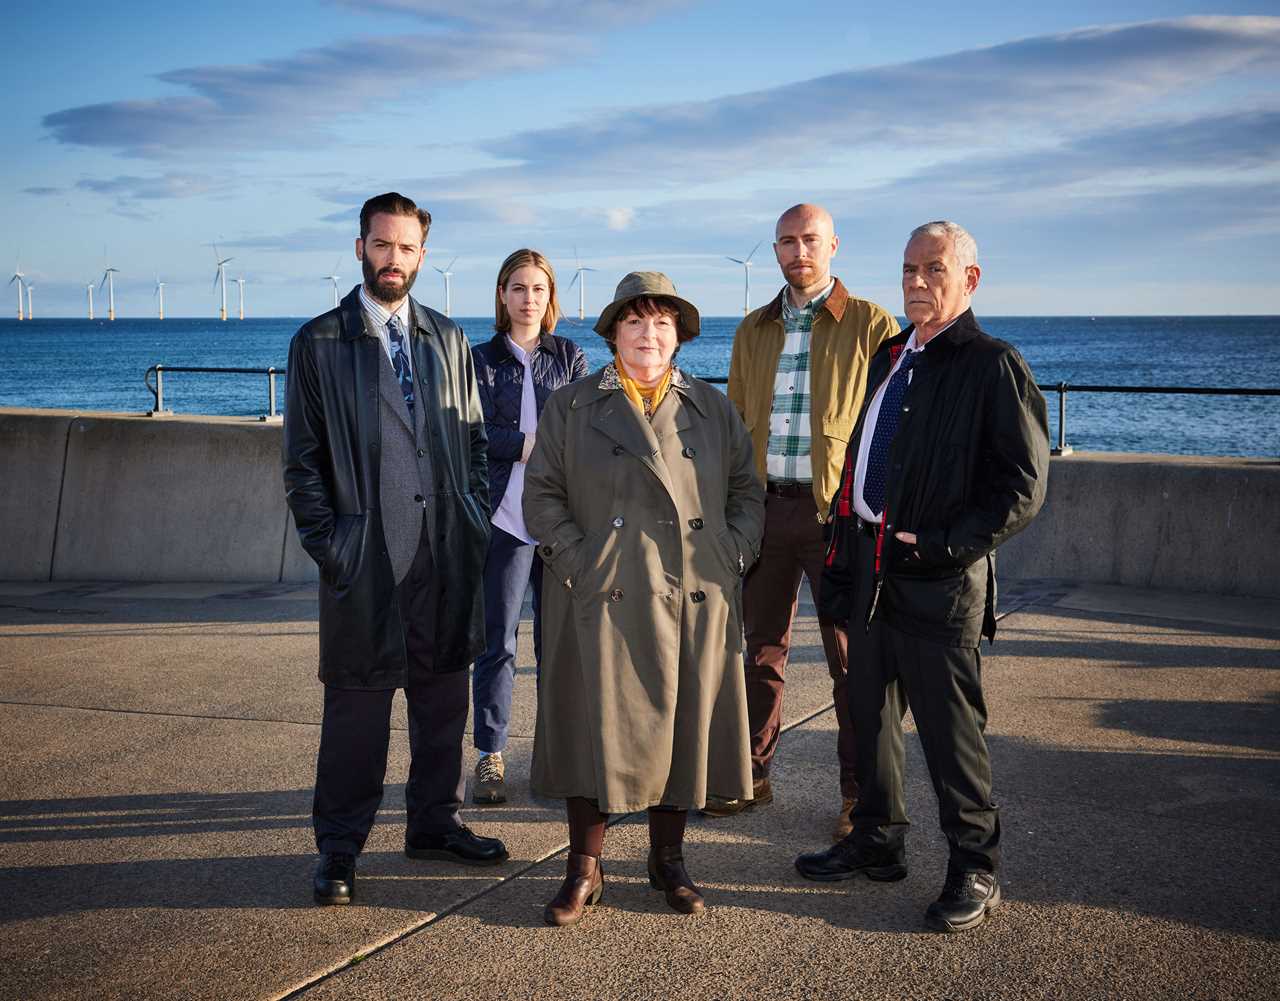 Brenda Blethyn gives update on future of ITV's Vera after awards snub and fan interaction